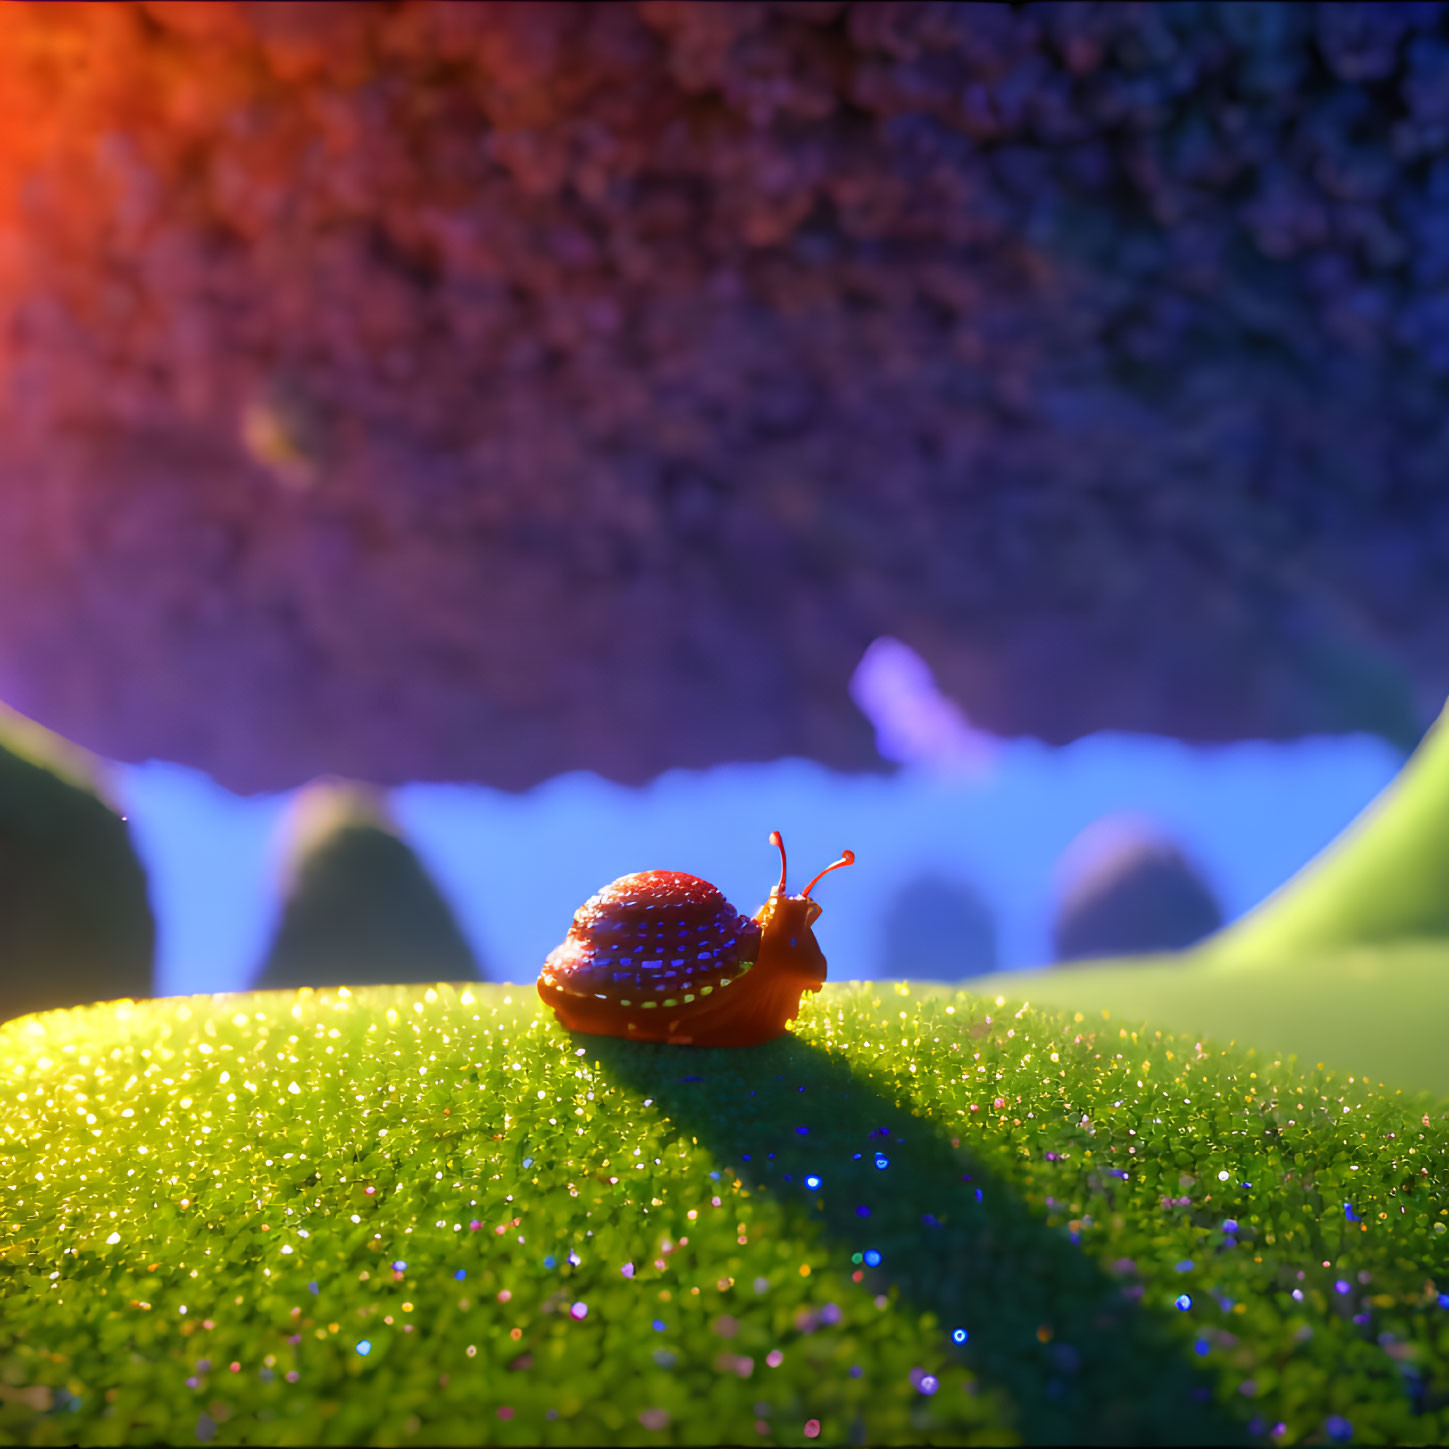 Colorful Snail with Patterned Shell on Dewy Hill in Purple Hues